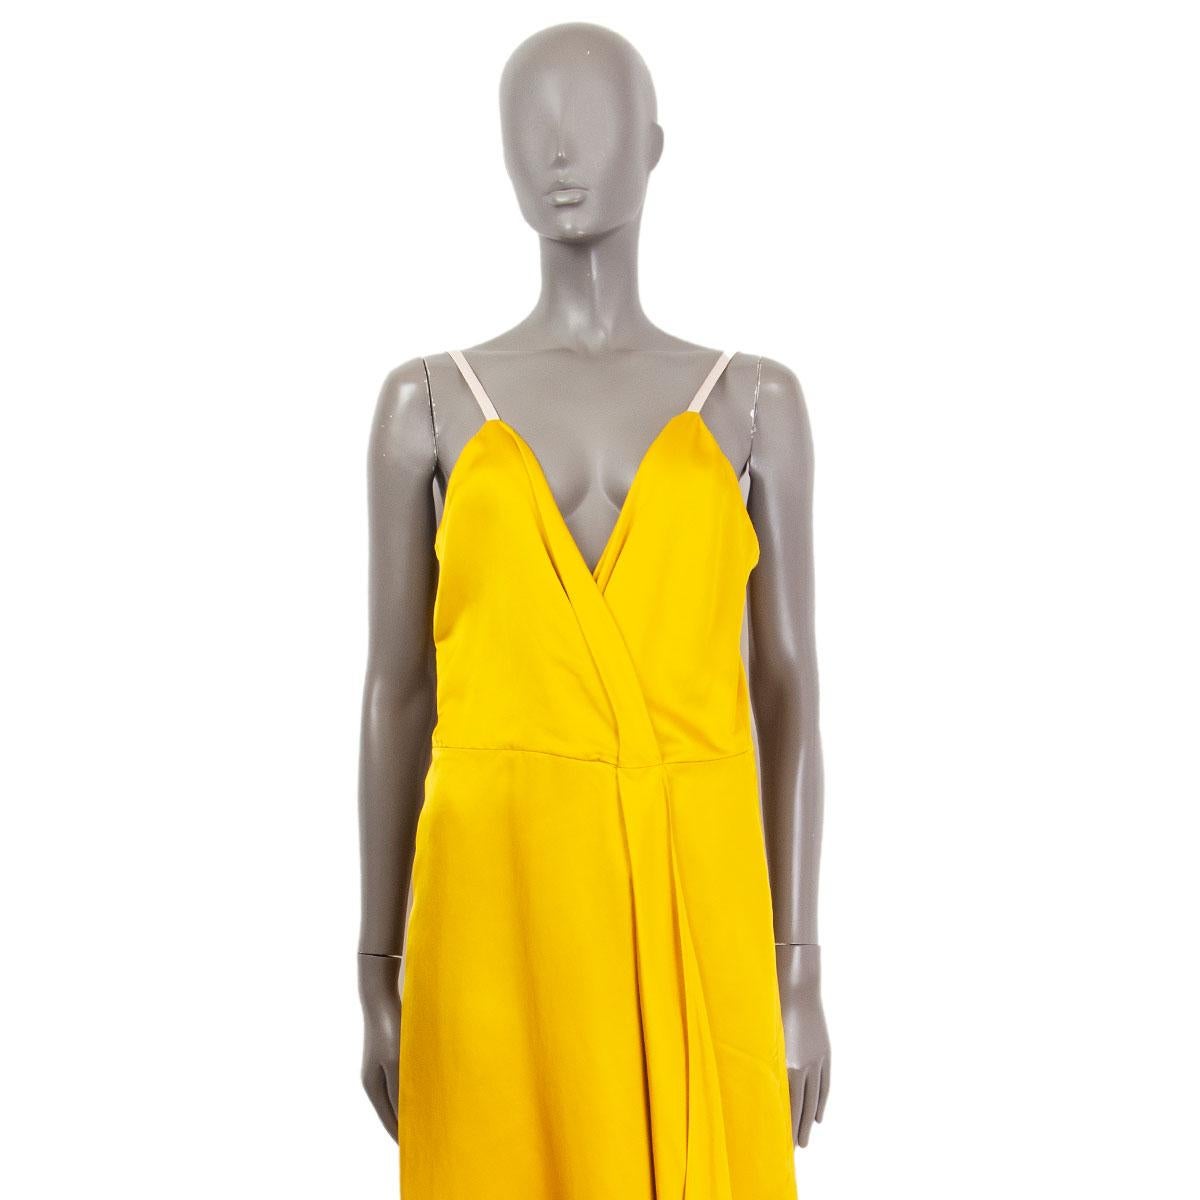 Victoria Beckham draped spaghetti-strap satin dress in yellow silk (52%) and viscose (48%) with a pleated deep v-neck front. Has been worn and is in excellent condition. 

Tag Size 12
Size M
Bust 90cm (35.1in)
Waist 76cm (29.6in)
Hips 100cm